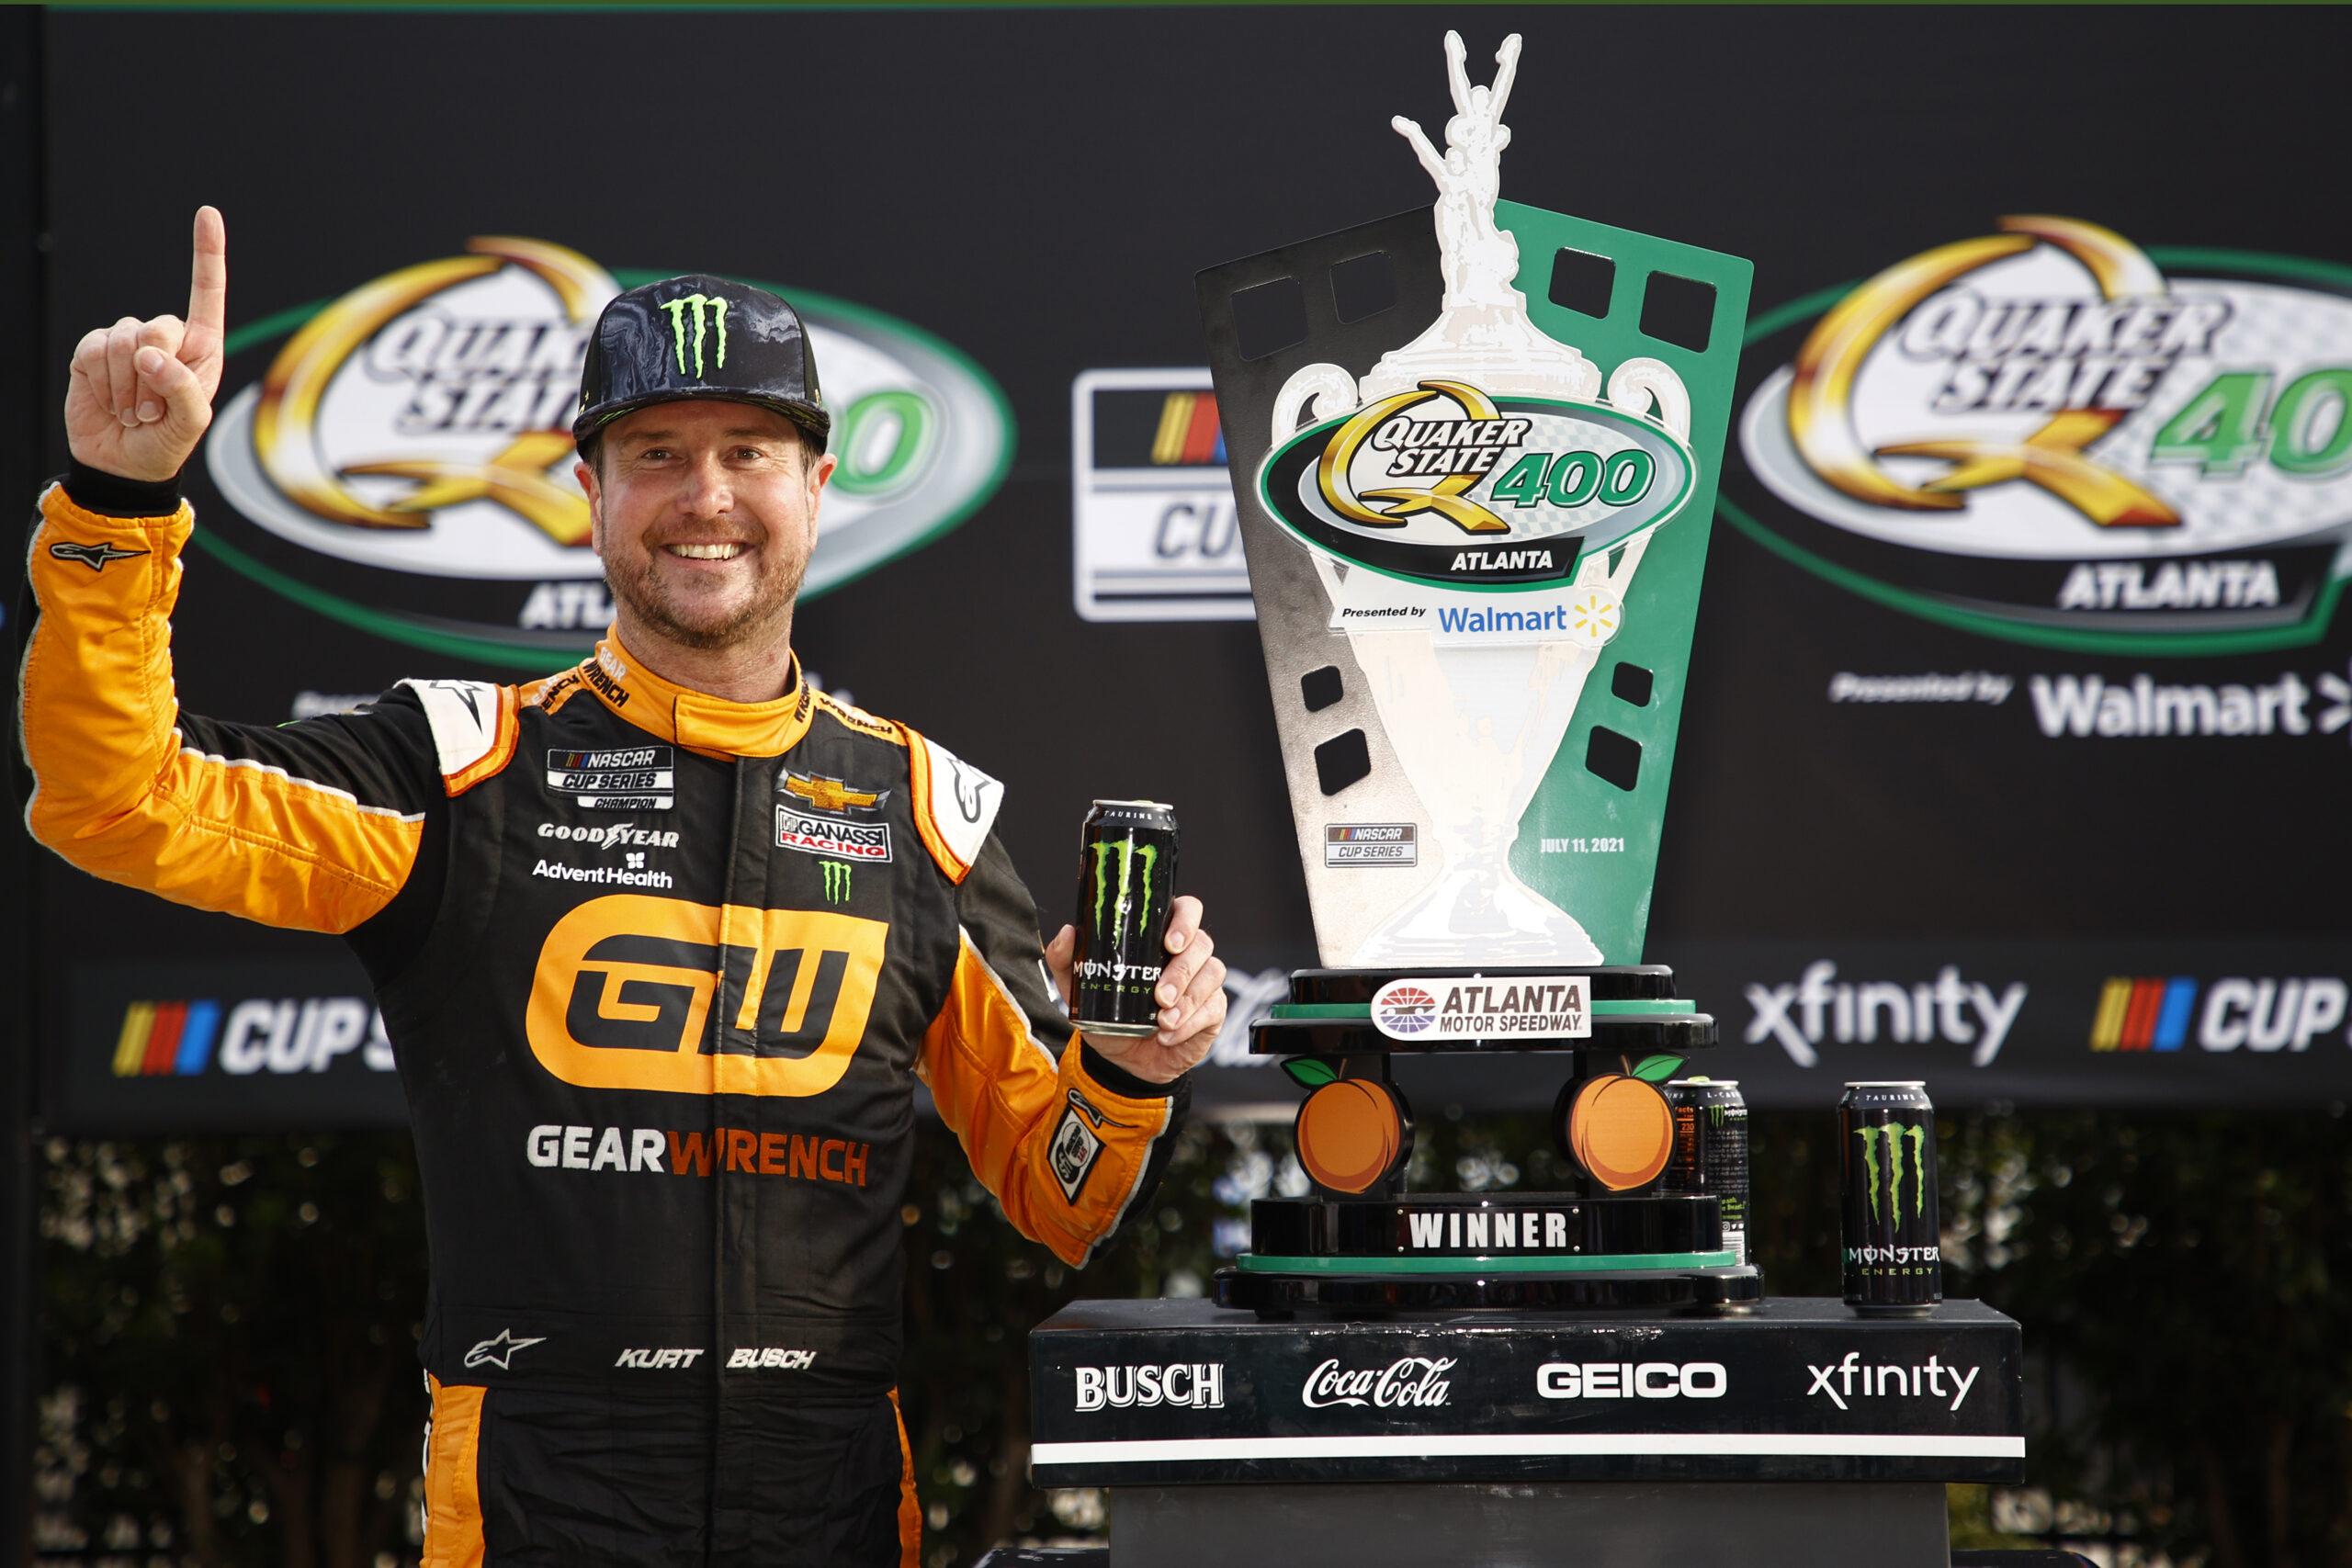 Chiefly, Kurt Busch reigned supreme in Sunday's Quaker State 400 at Atlanta. (Photo: Jared C. Tilton/Getty Images)